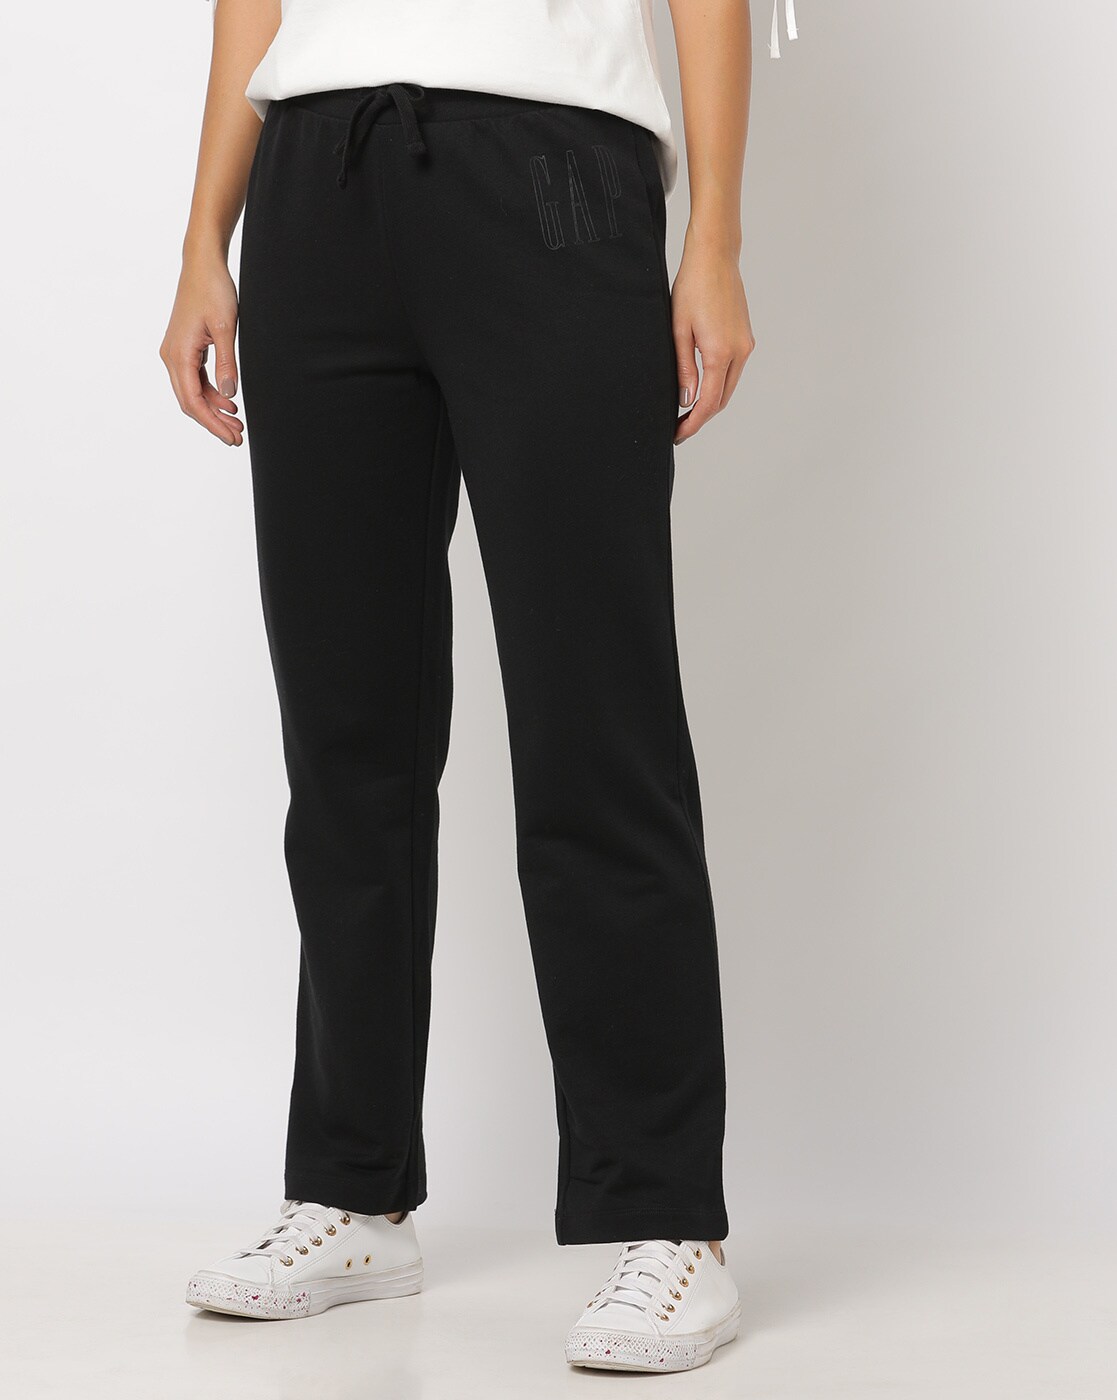 Buy Black Track Pants for Women by CAYMAN Online | Ajio.com